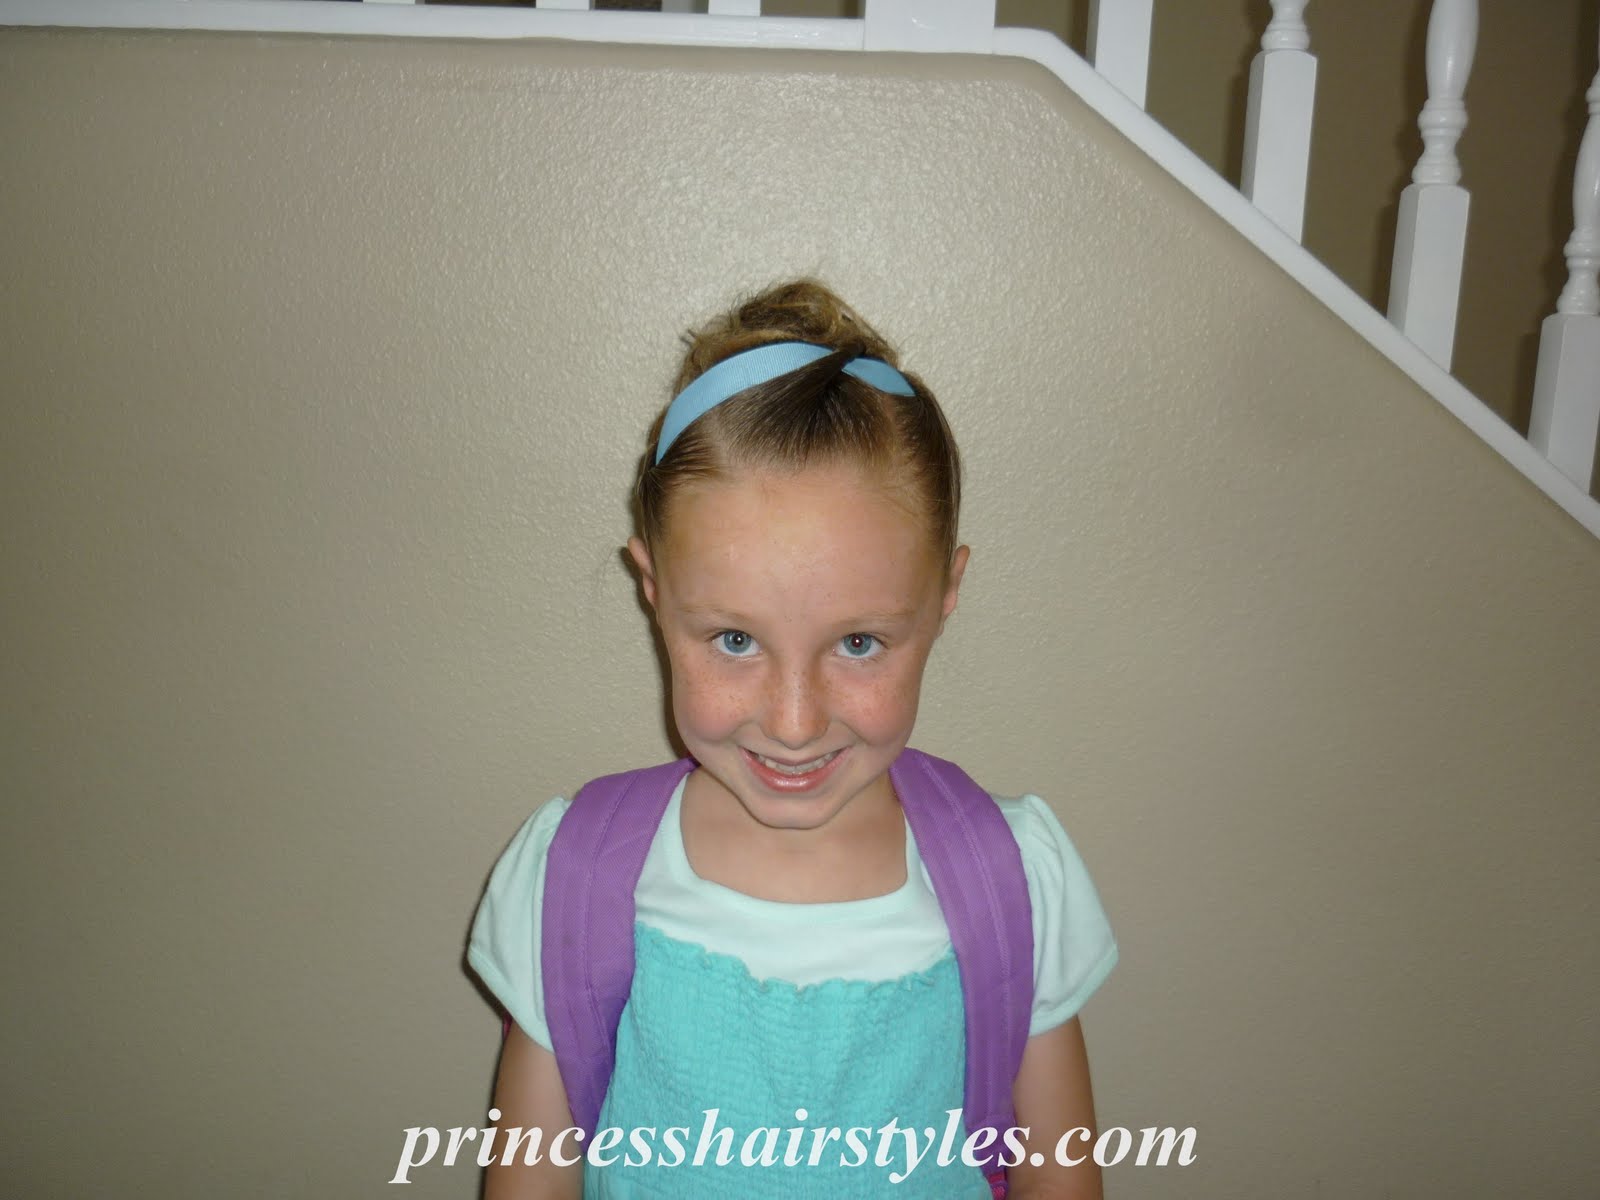 Hairstyles For Girls: Hairstyles for Dance Competition, Recital